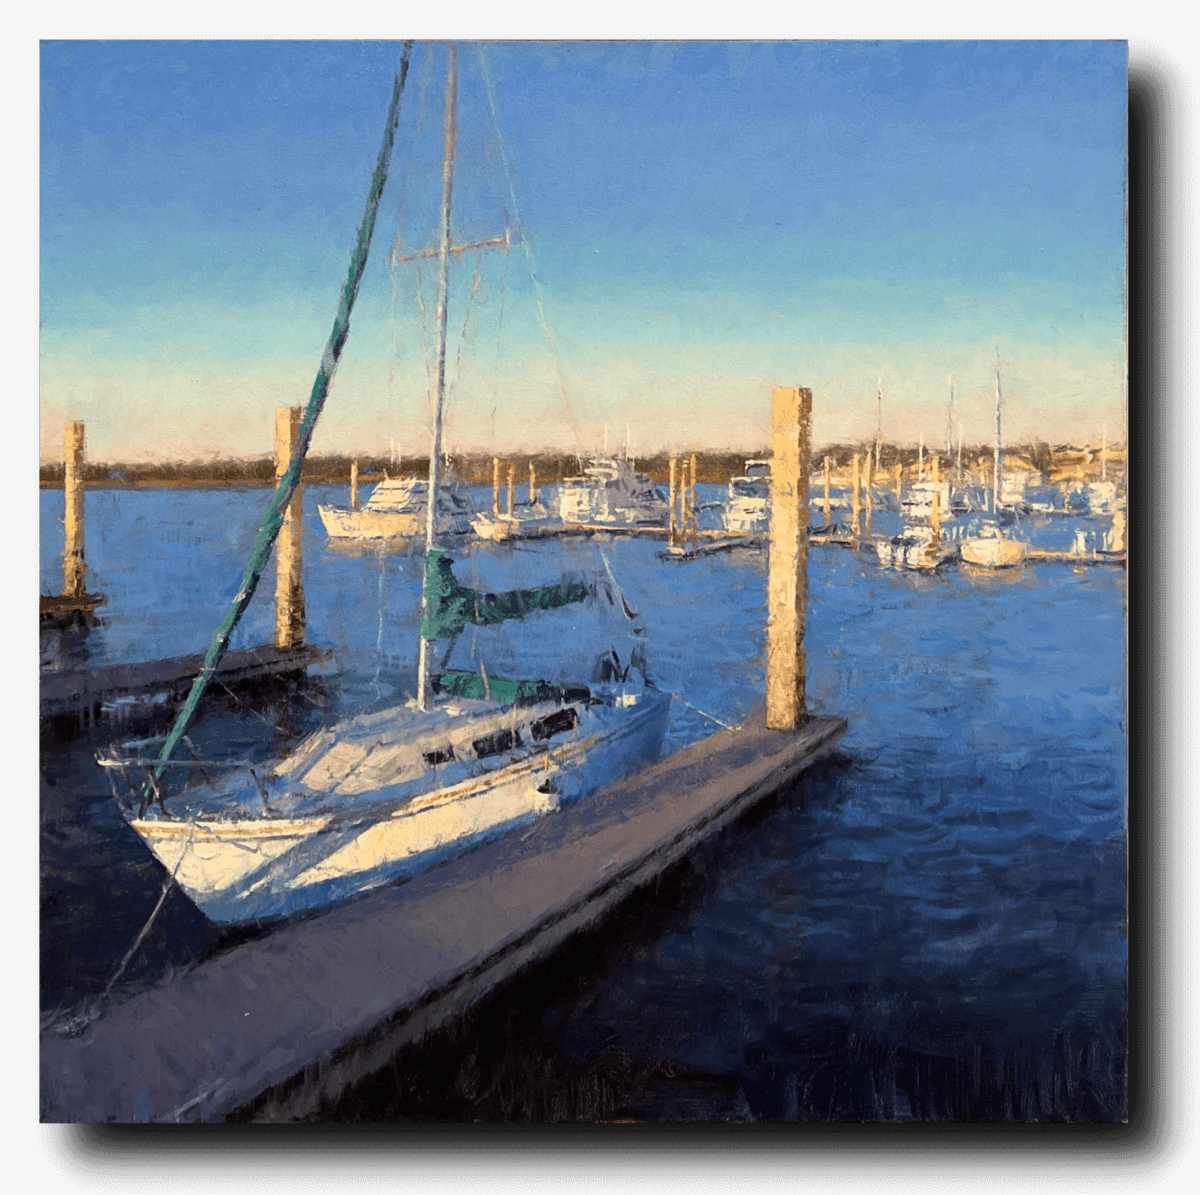 Tomorrow We Sail by Mark Bailey at LePrince Galleries